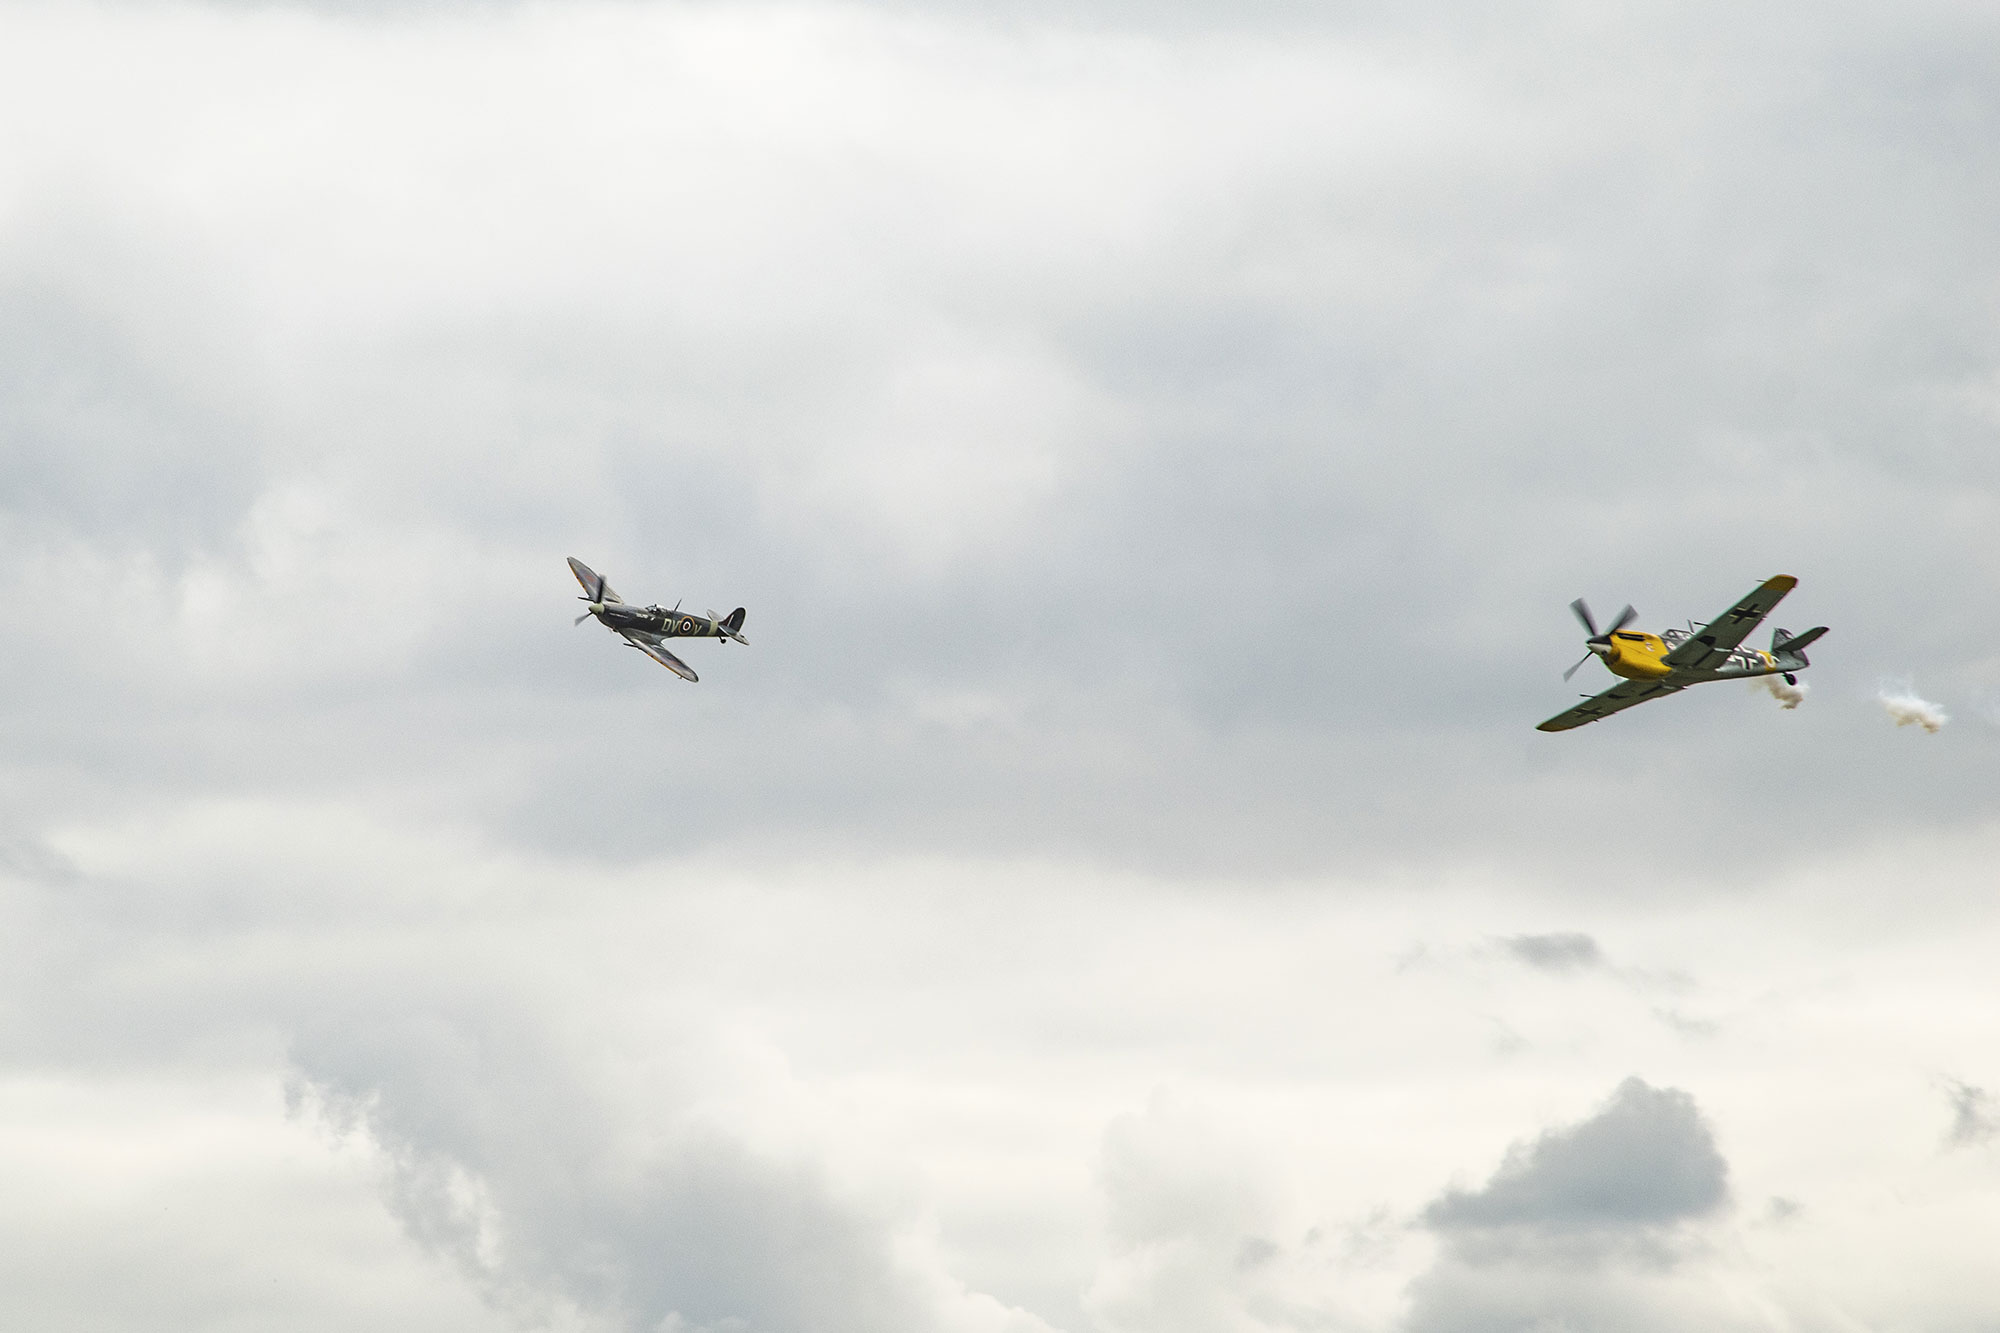 The Ultimate Fighters, P-47 Thunderbolt (Nellie B), Spitfire Mk V, ME109 (White 9), Mustang TF-51 D (Contrary Mary), Pilots: Jon Gowdy, Dave Puleston, Richard Grace and Andy Durston, Air Legend 2021, Nos Dren